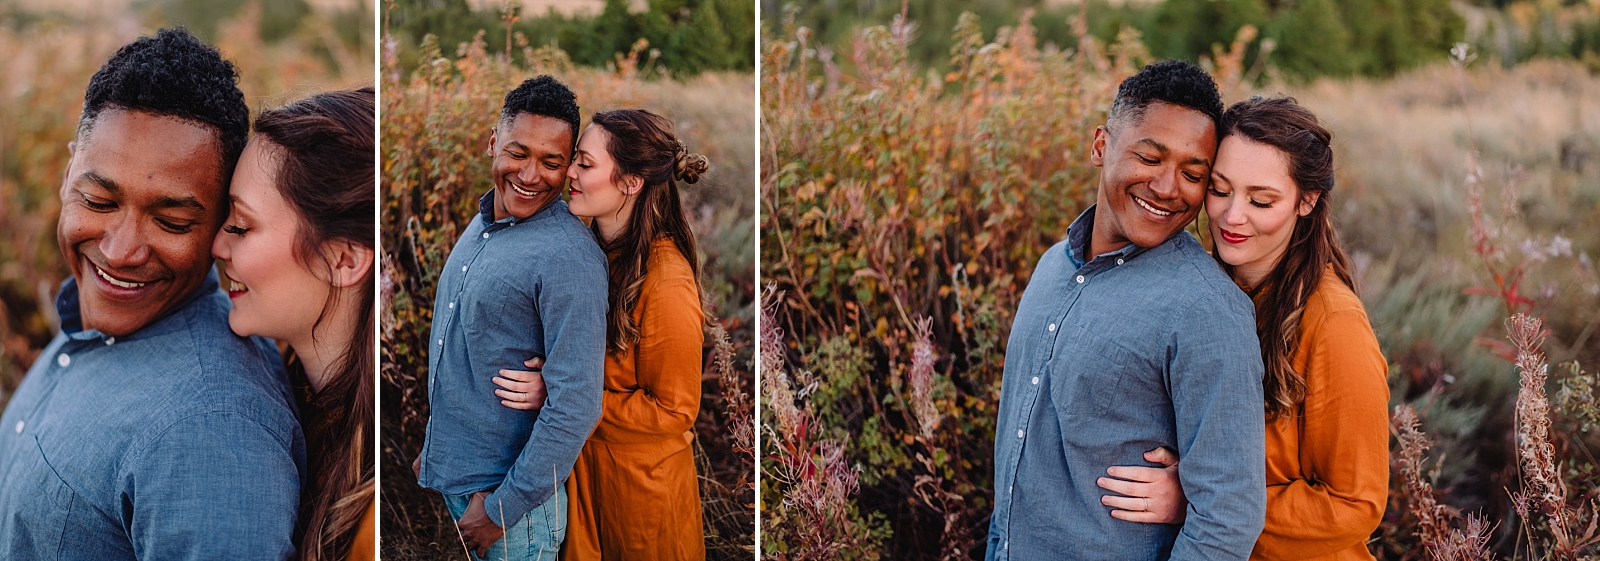 romantic engagement photo couples in the mountains